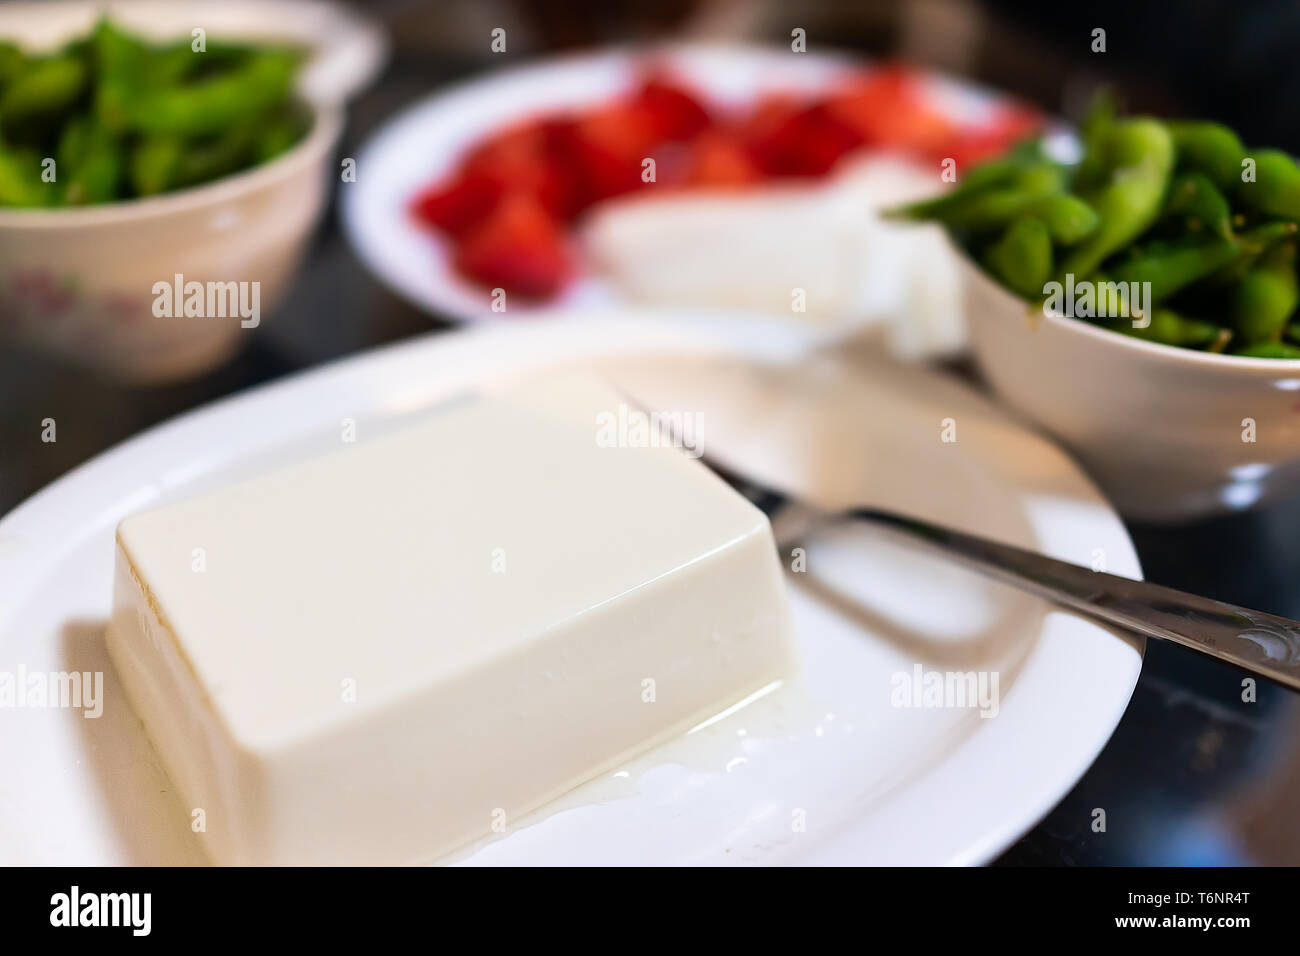 Plate of plain boiled or cold tofu in restaurant or house with vegetable dish snack of boiled edamame and fork Stock Photo